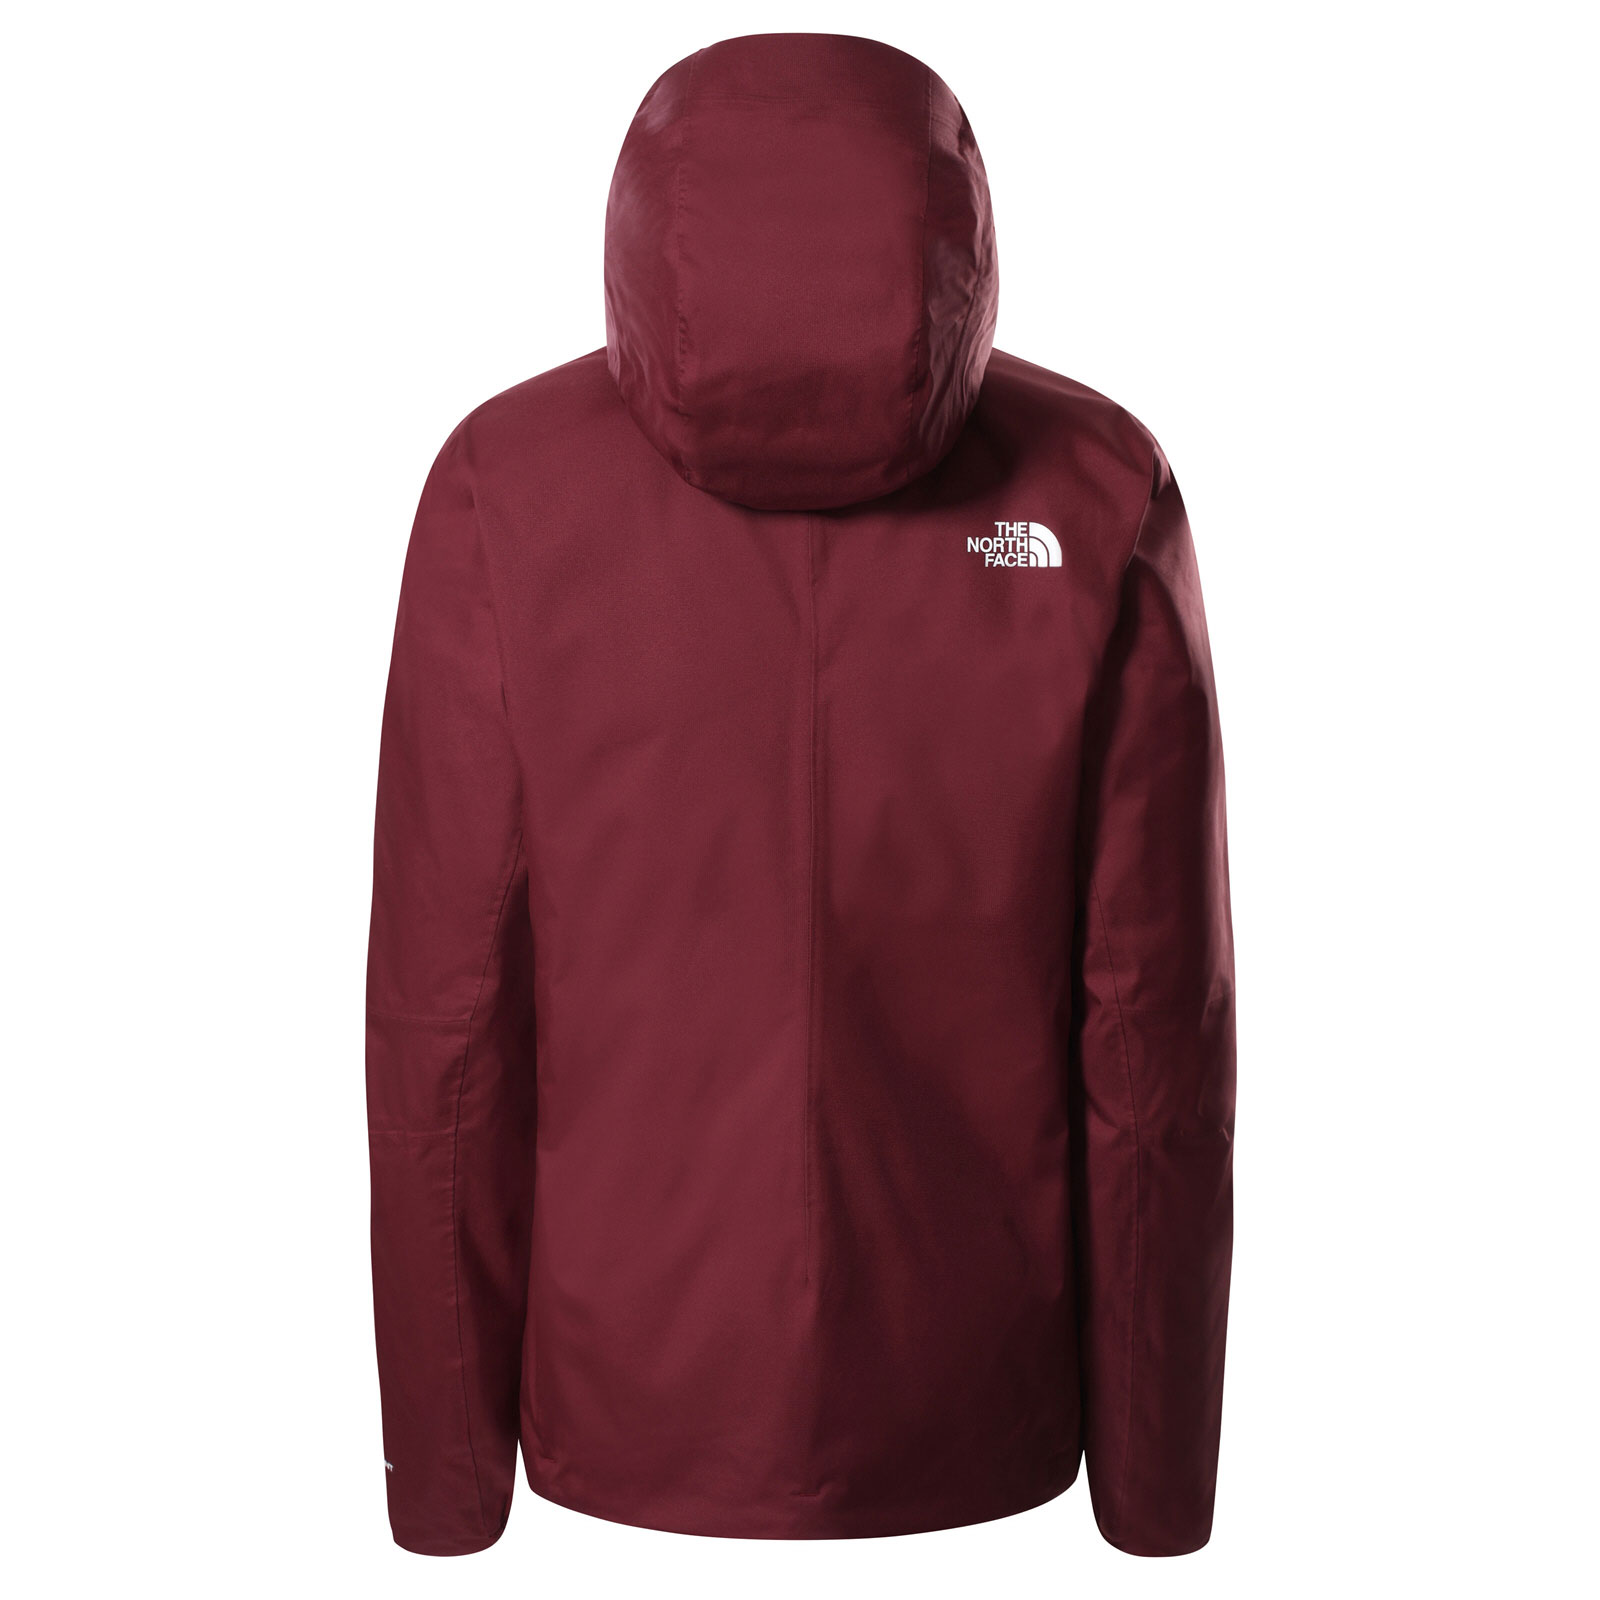 THE NORTH FACE WOMENS QUEST INSULATED JACKET